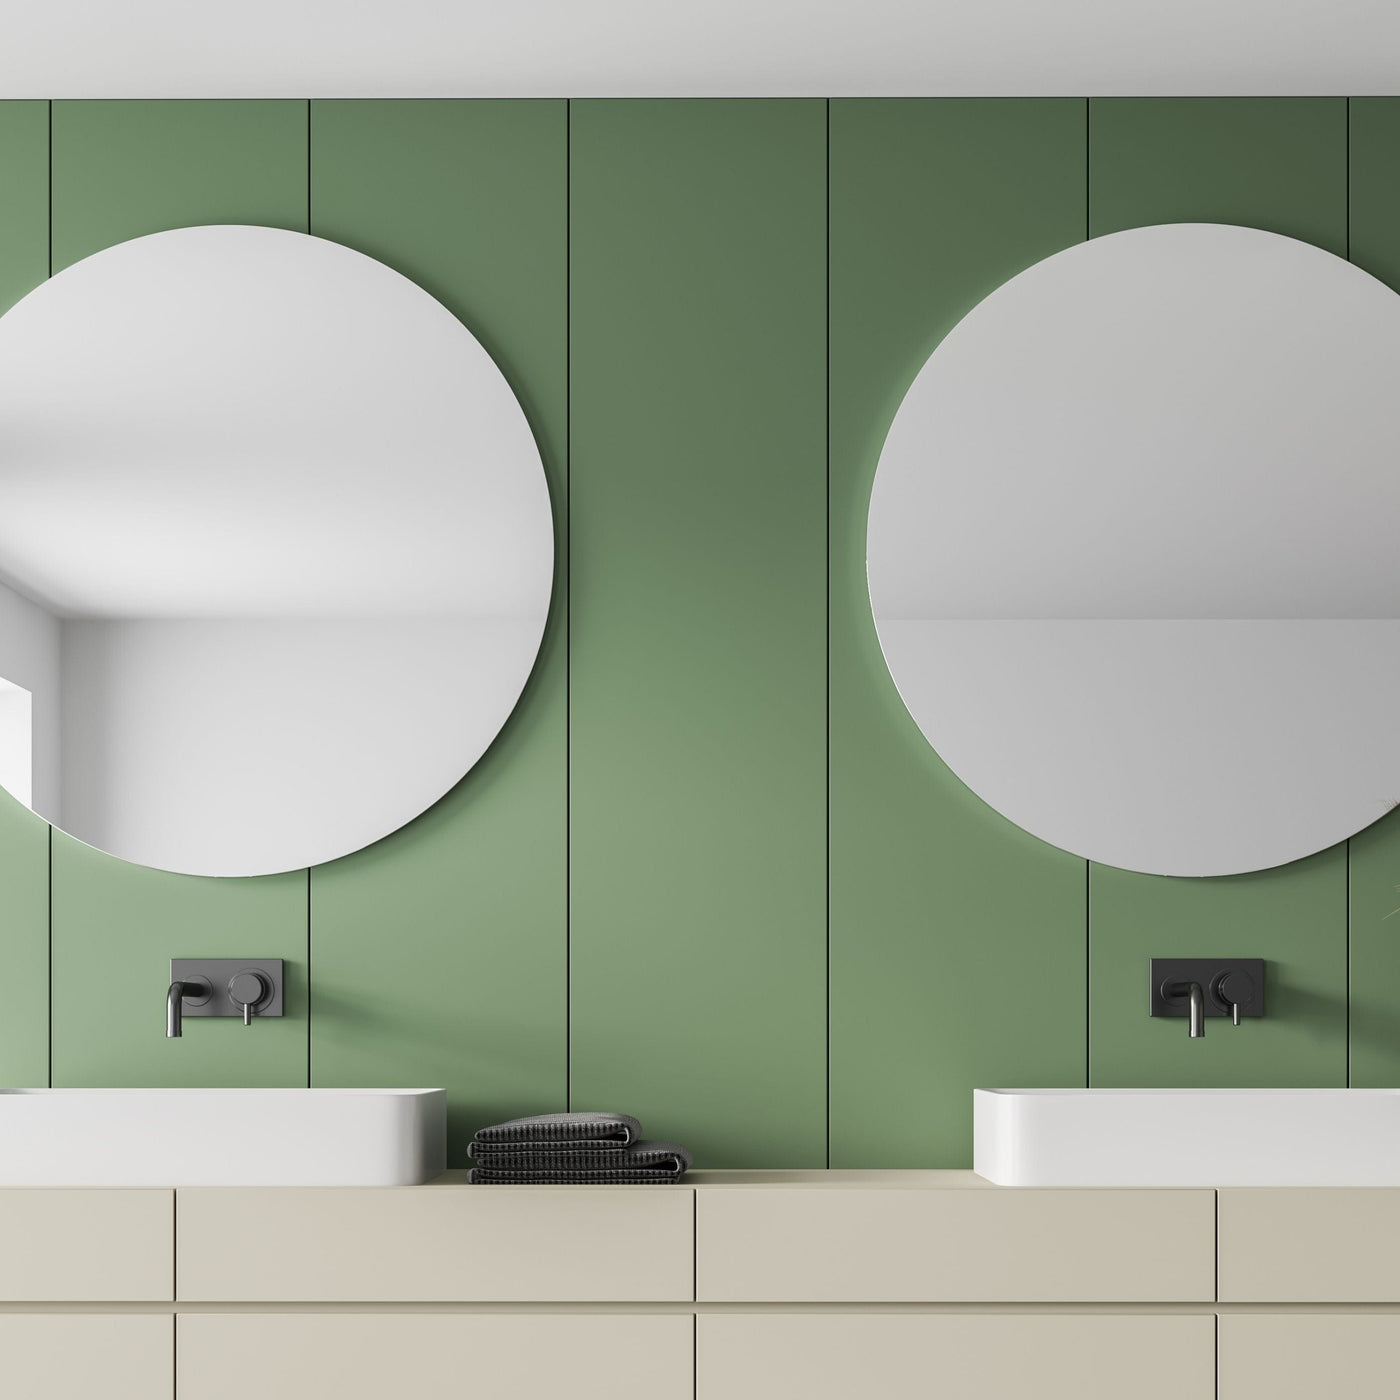 Bathroom with modern light beige vanity  cabinet with two white  rectangular vessel sinks. Two round mirrors with Forest Path painted on back wall